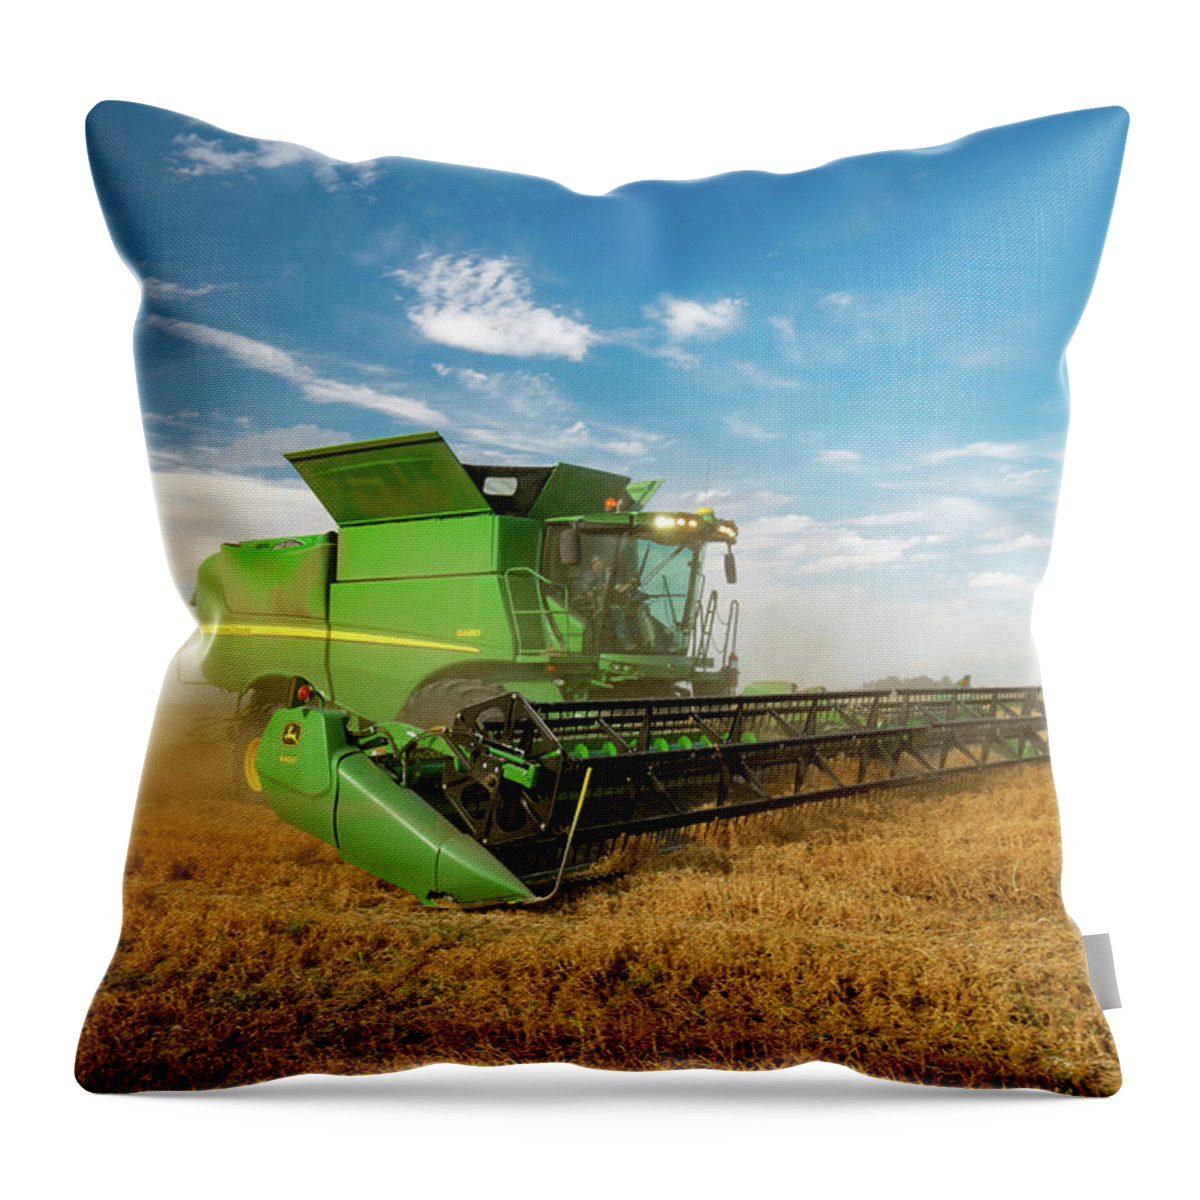 Chickpeas Throw Pillow featuring the photograph Chickpea Harvest by Todd Klassy